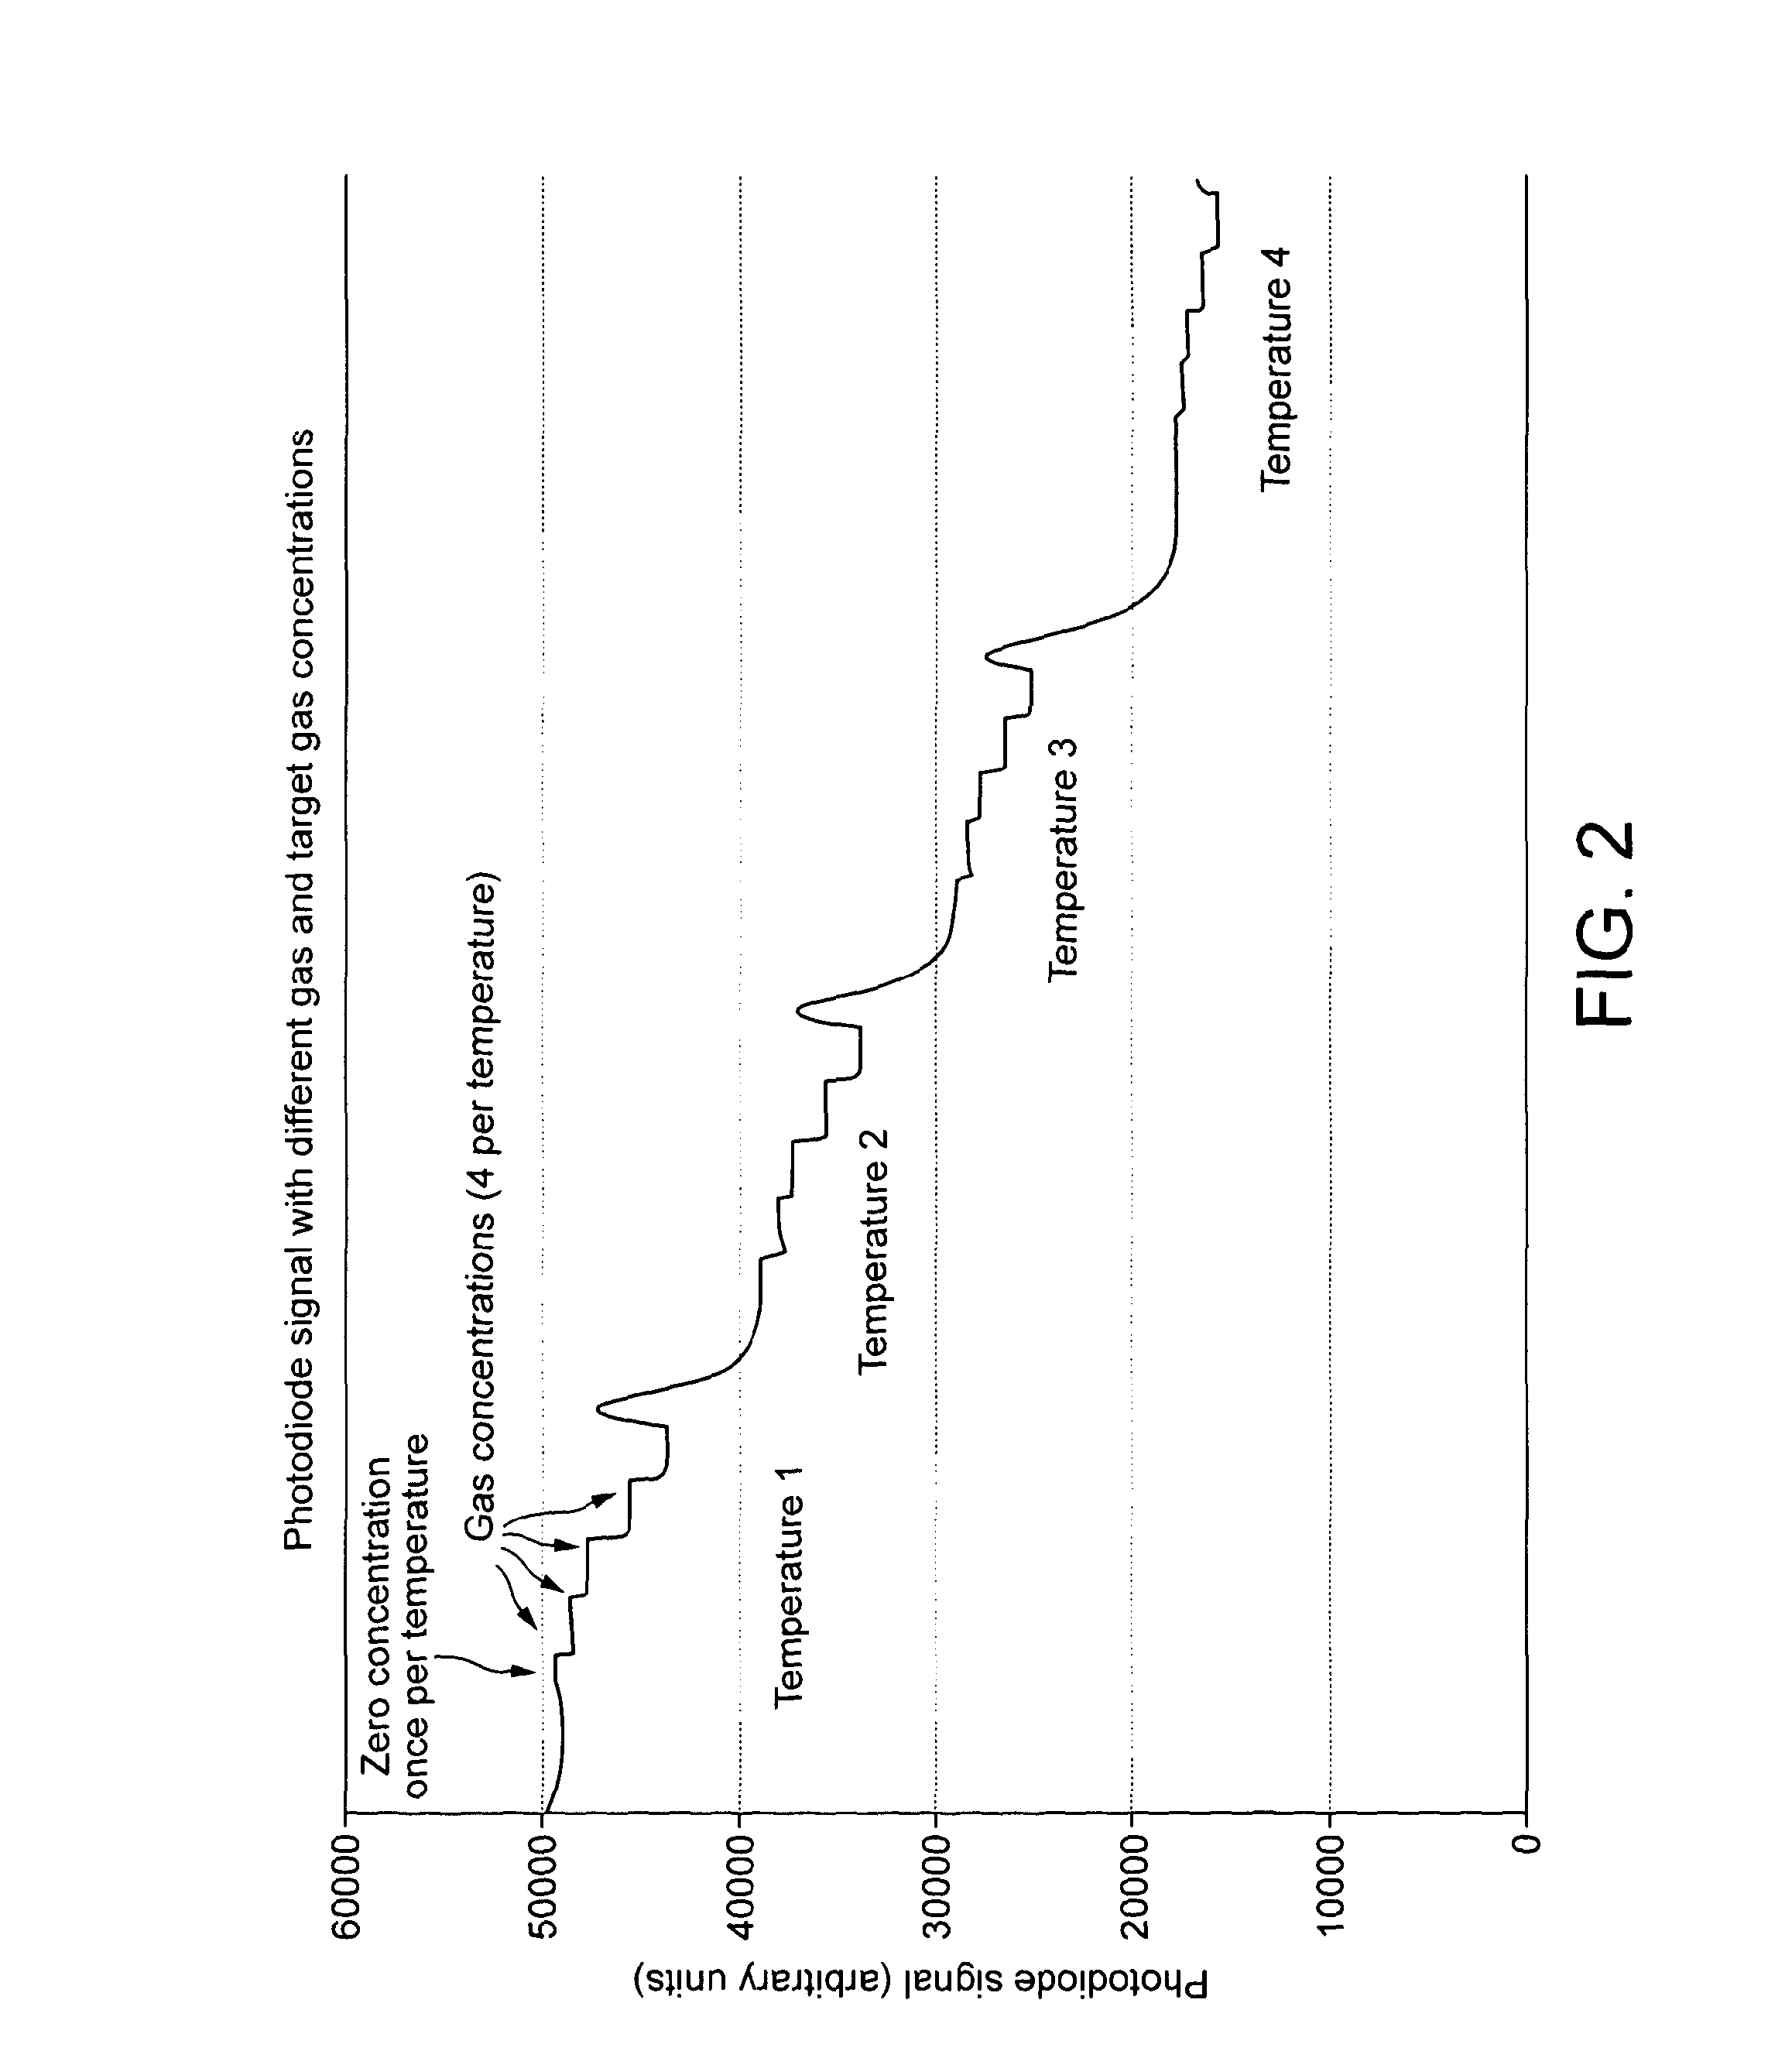 Temperature calibration methods and apparatus for optical absorption gas sensors, and optical absorption gas sensors thereby calibrated